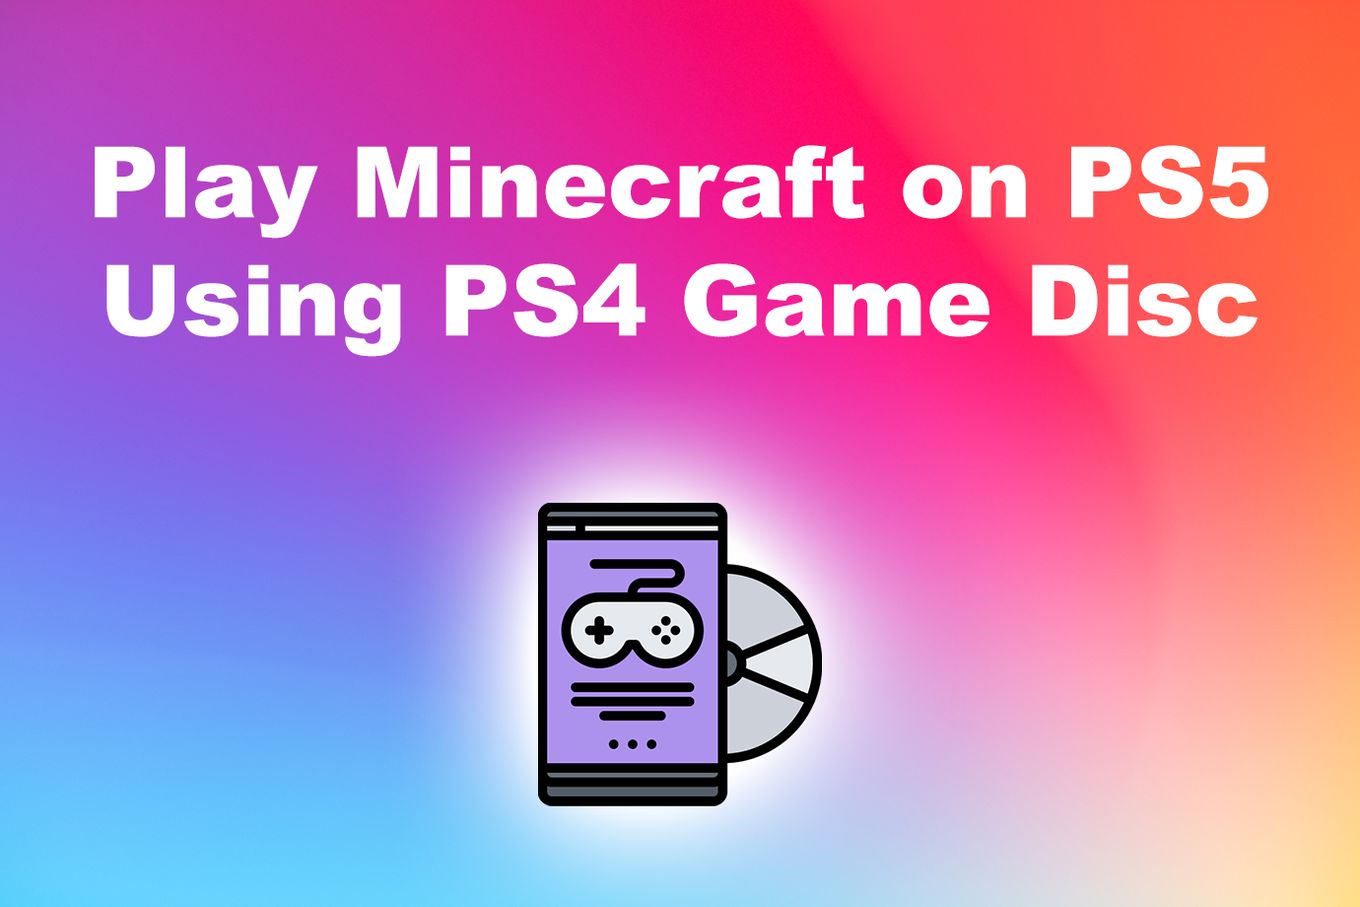 Play Minecraft on PS5 Using PS4 Game Disc